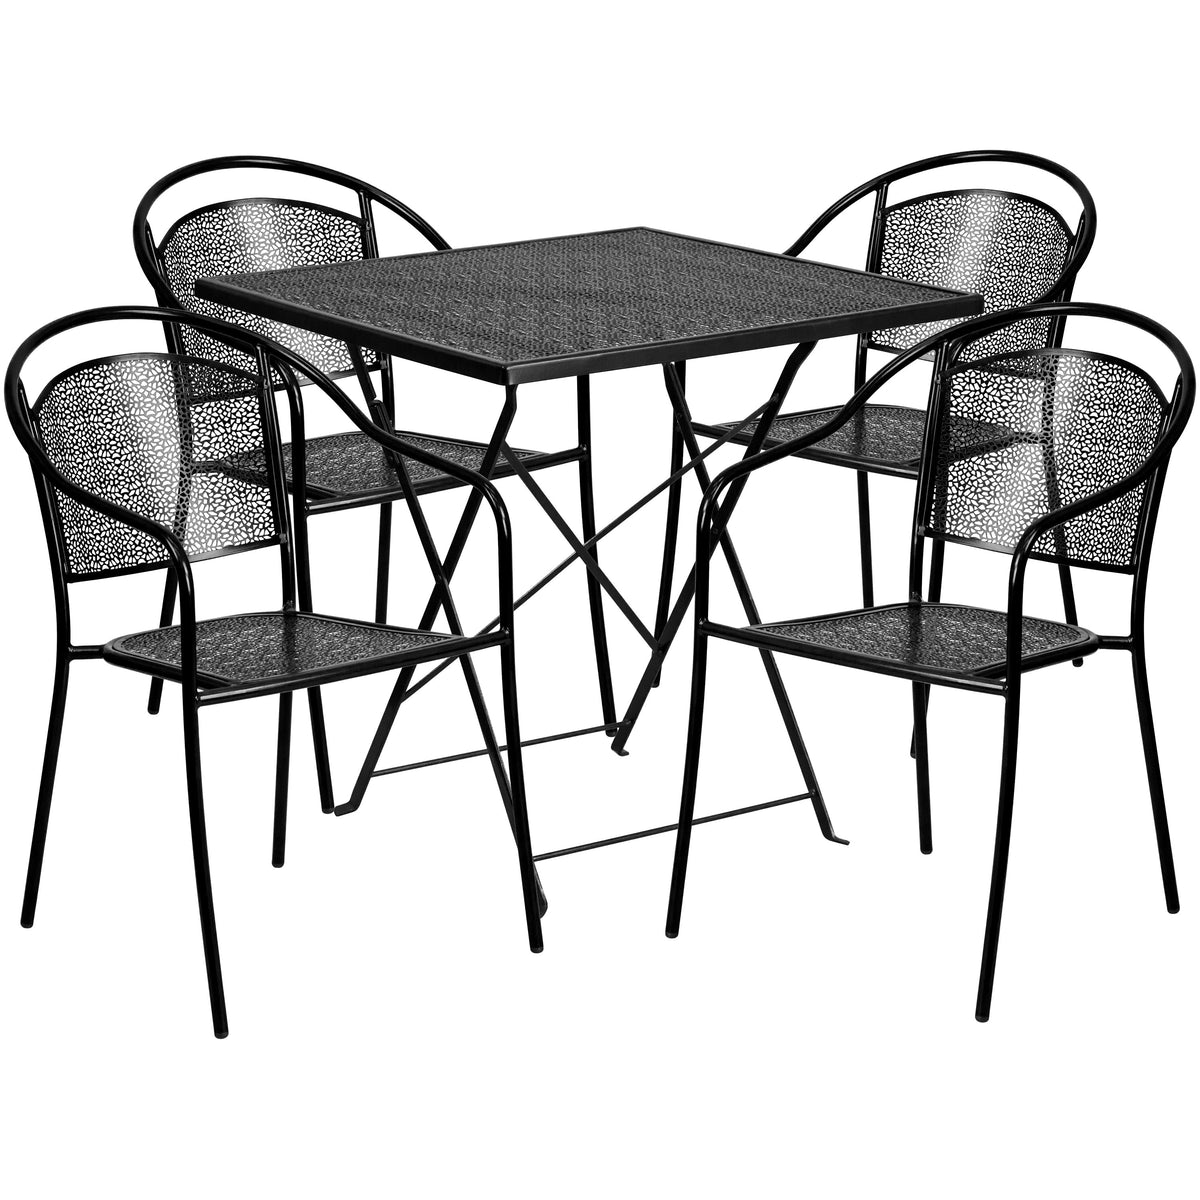 Black |#| 28inch Square Black Indoor-Outdoor Steel Folding Patio Table Set with 4 Chairs